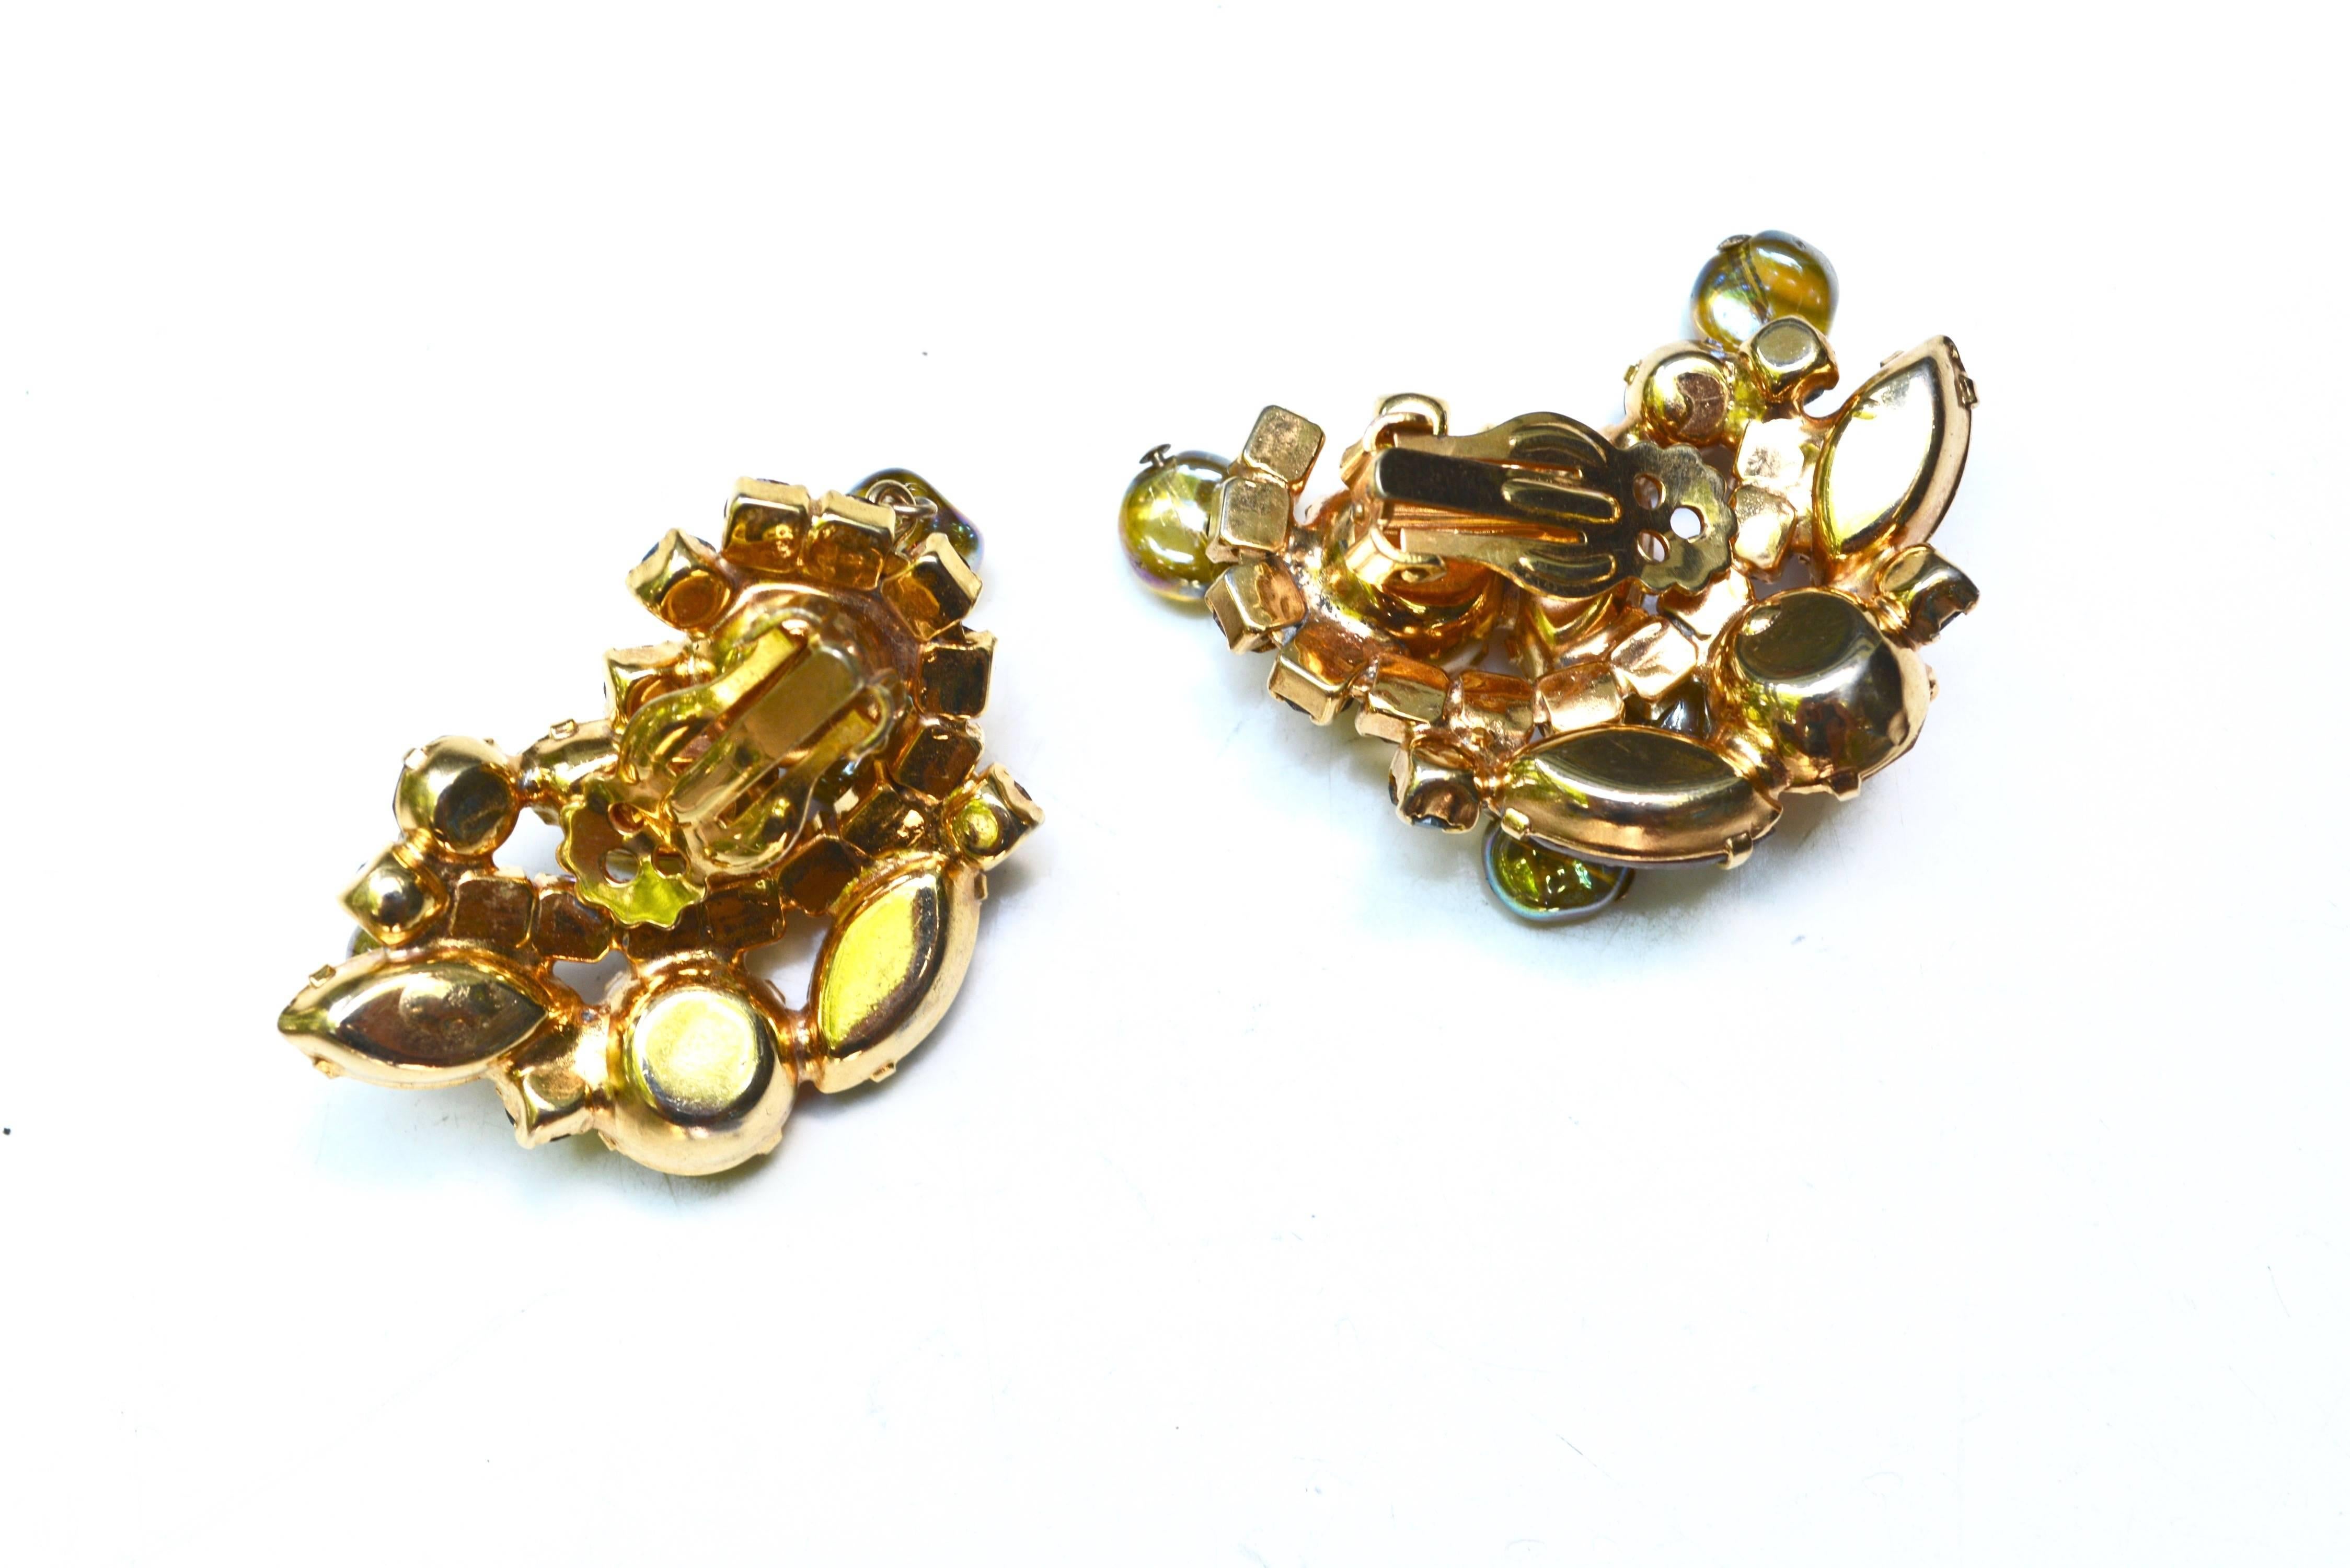 50s amber style glass stone clip on earrings with dangling beads and a bit of borealis finish. Unsigned, but they are quality in construction. 